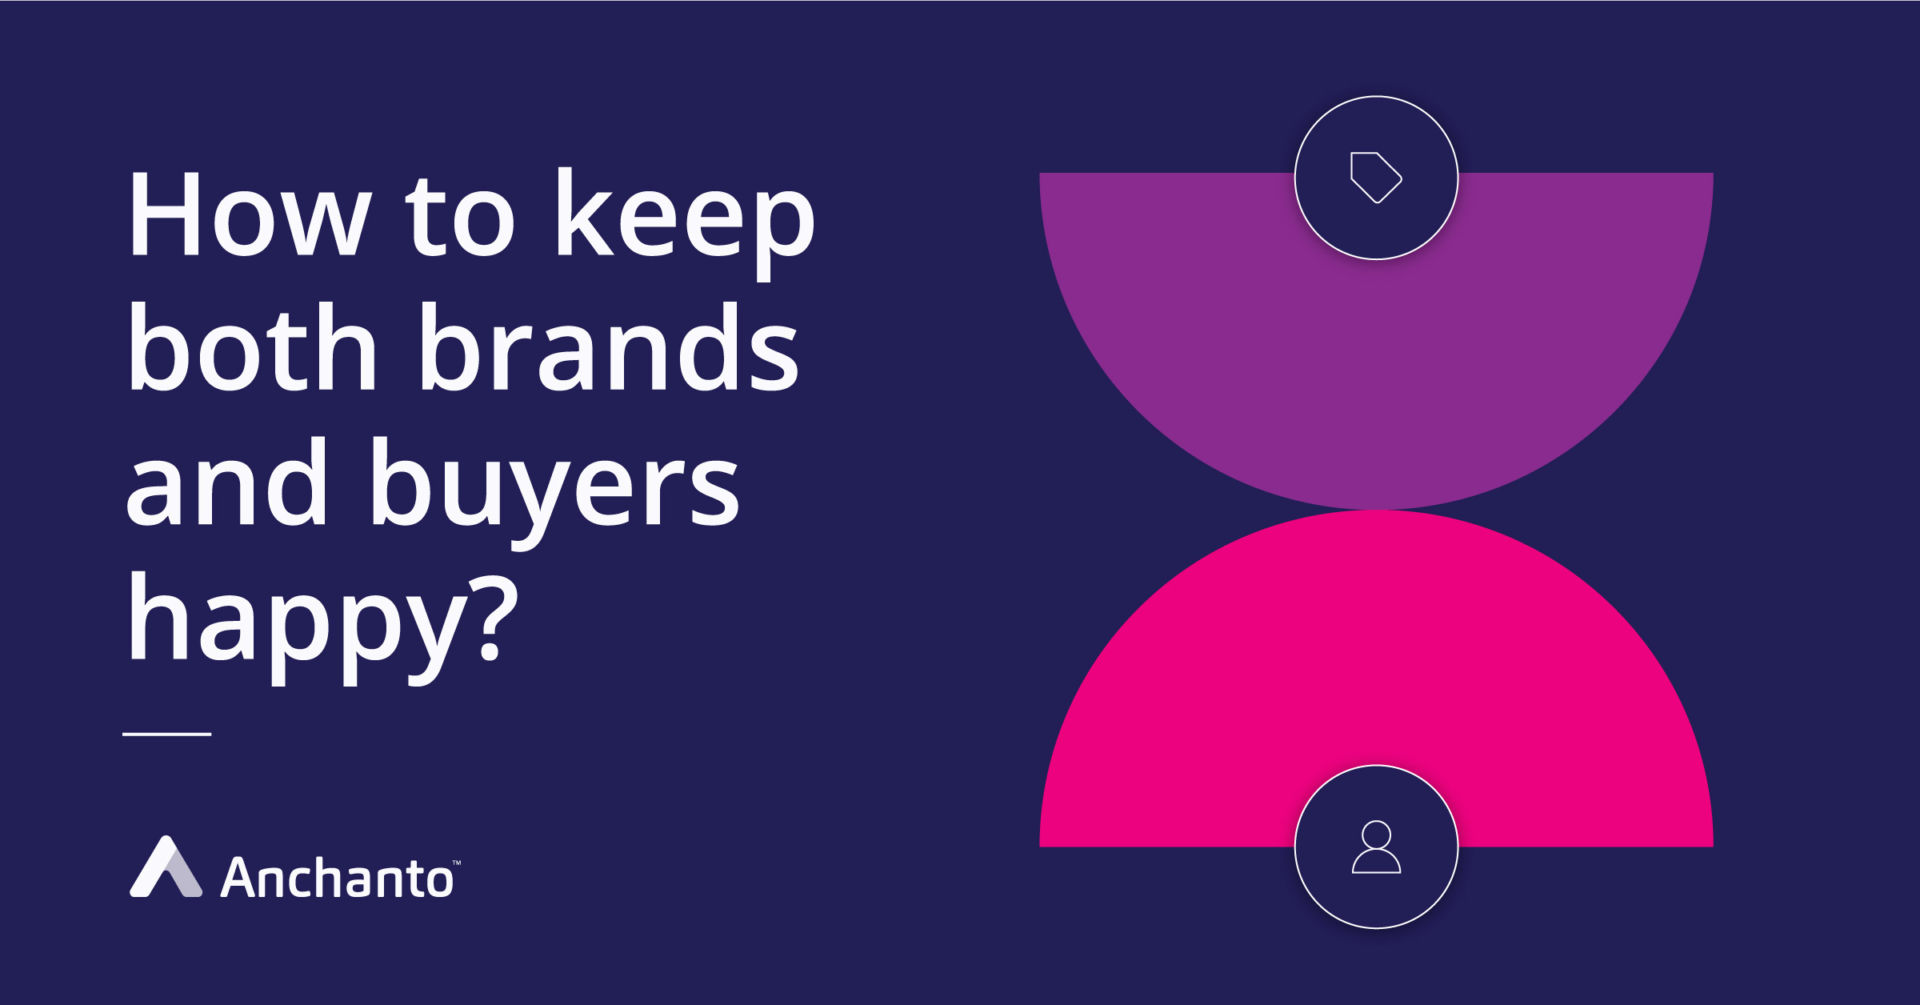 How can distributors keep both brands and buyers happy?